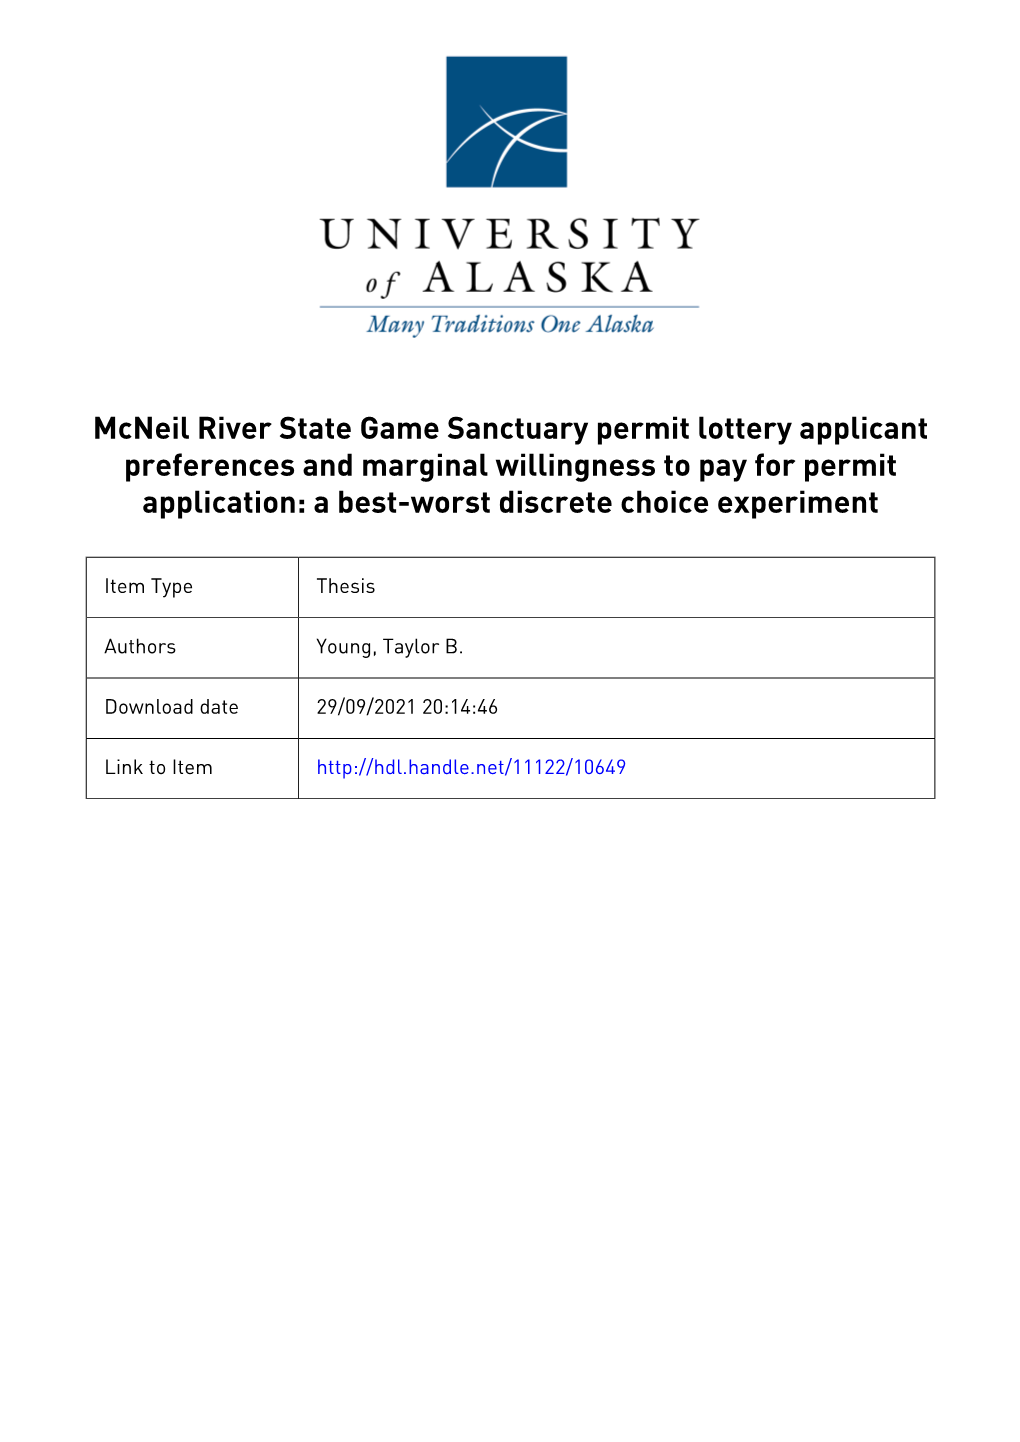 MCNEIL RIVER STATE GAME SANCTUARY PERMIT LOTTERY APPLICANT WILLINGNESS to PAY DISCRETE CHOICE EXPERIMENT by Taylor B. Young, B